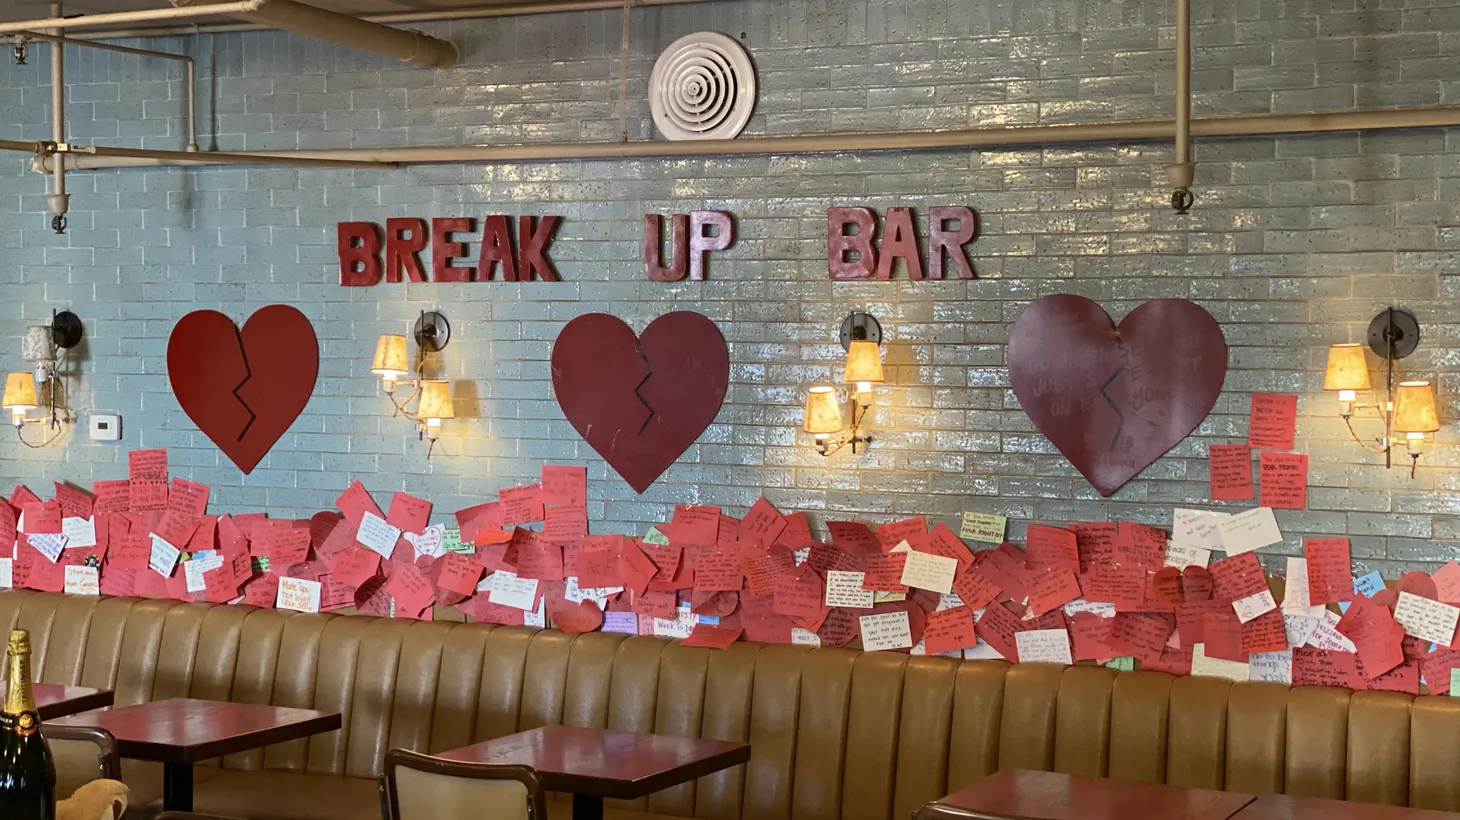 Immersive pop-up The Break Up bar caters to Angelenos in need of a place to vent after parting ways with a lover.